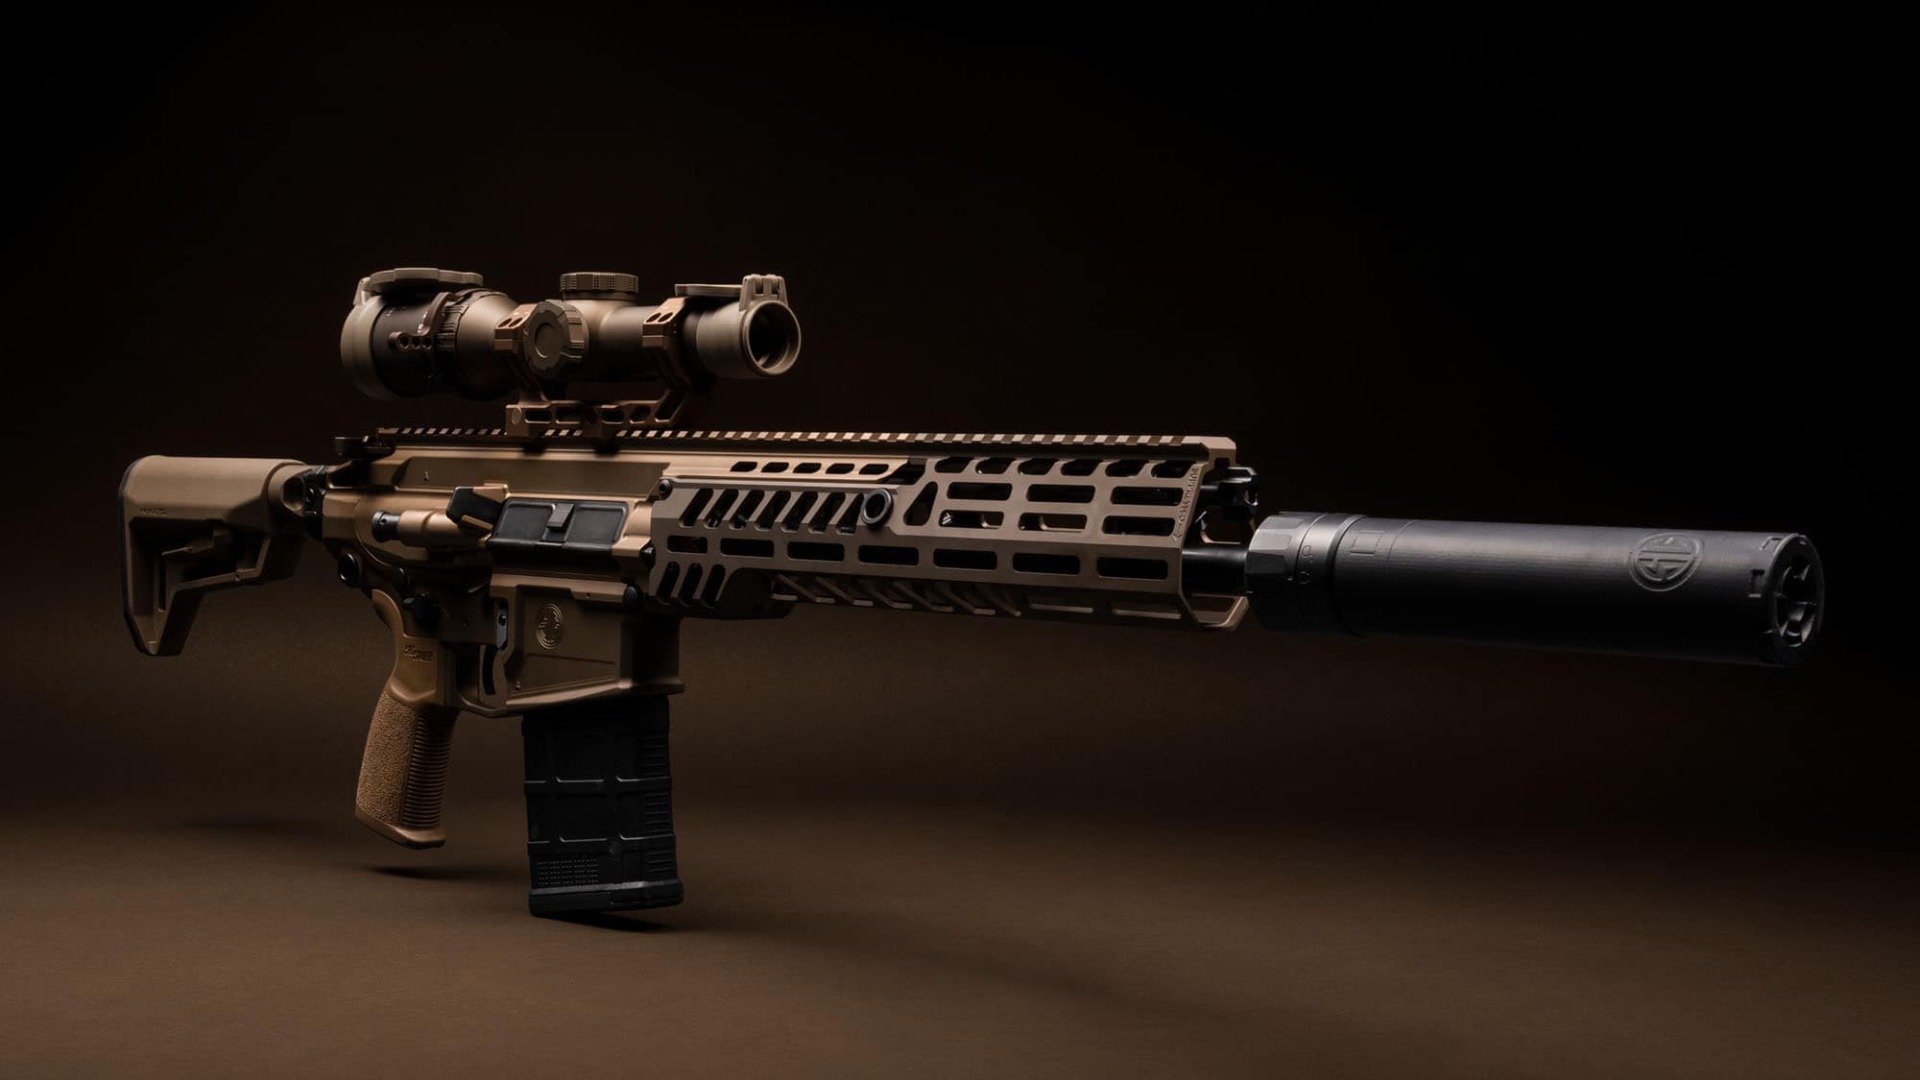 The MCX-SPEAR is the civilian version of the U.S. Army’s new XM7 rifle, which was chosen as part of the Next Generation Squad Weapons Program (NGSW). 